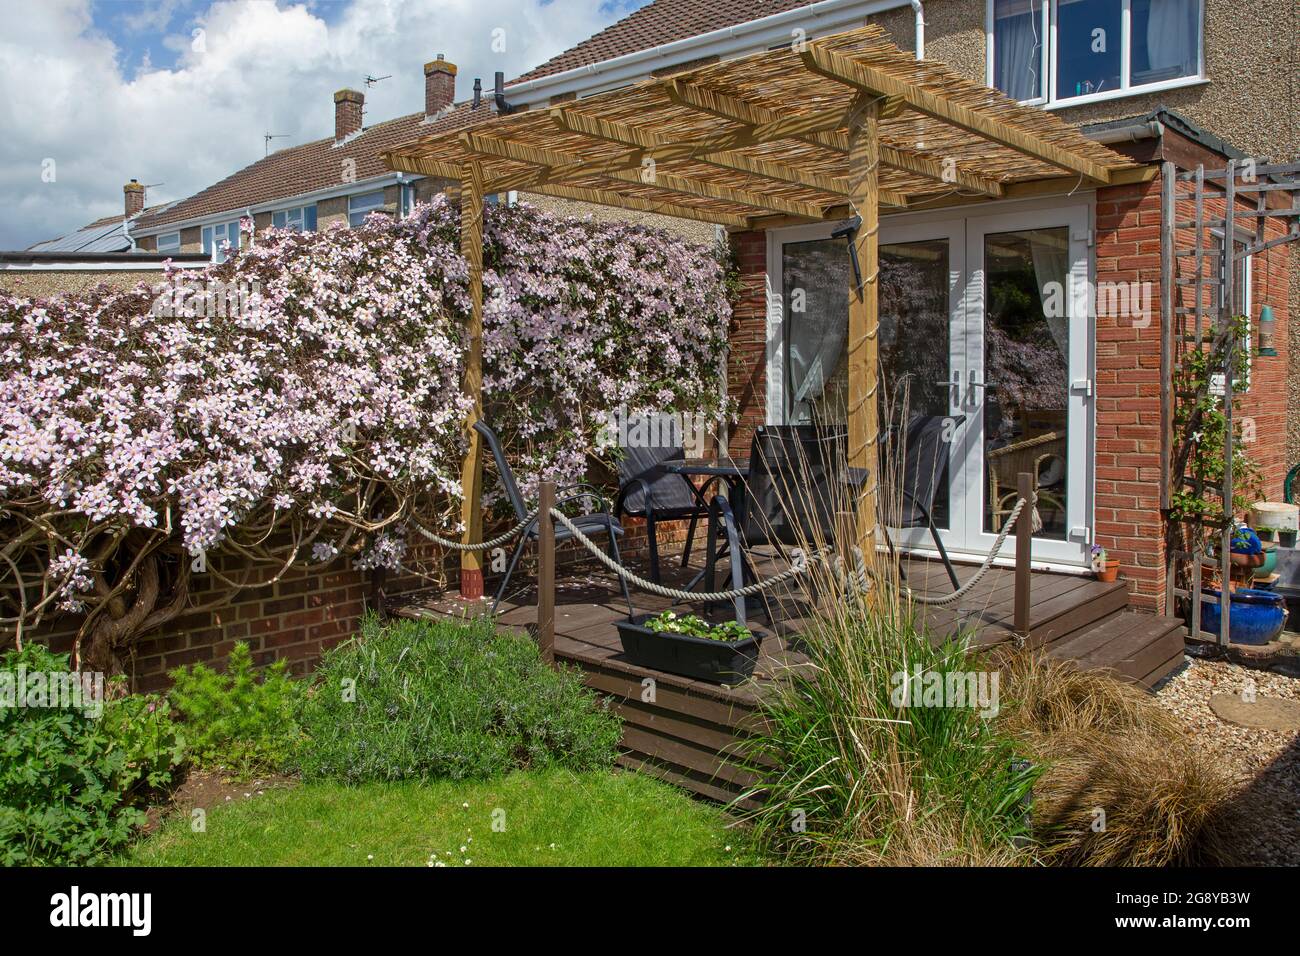 English garden with wooden decking and pergola and clematis growing along a fence Stock Photo